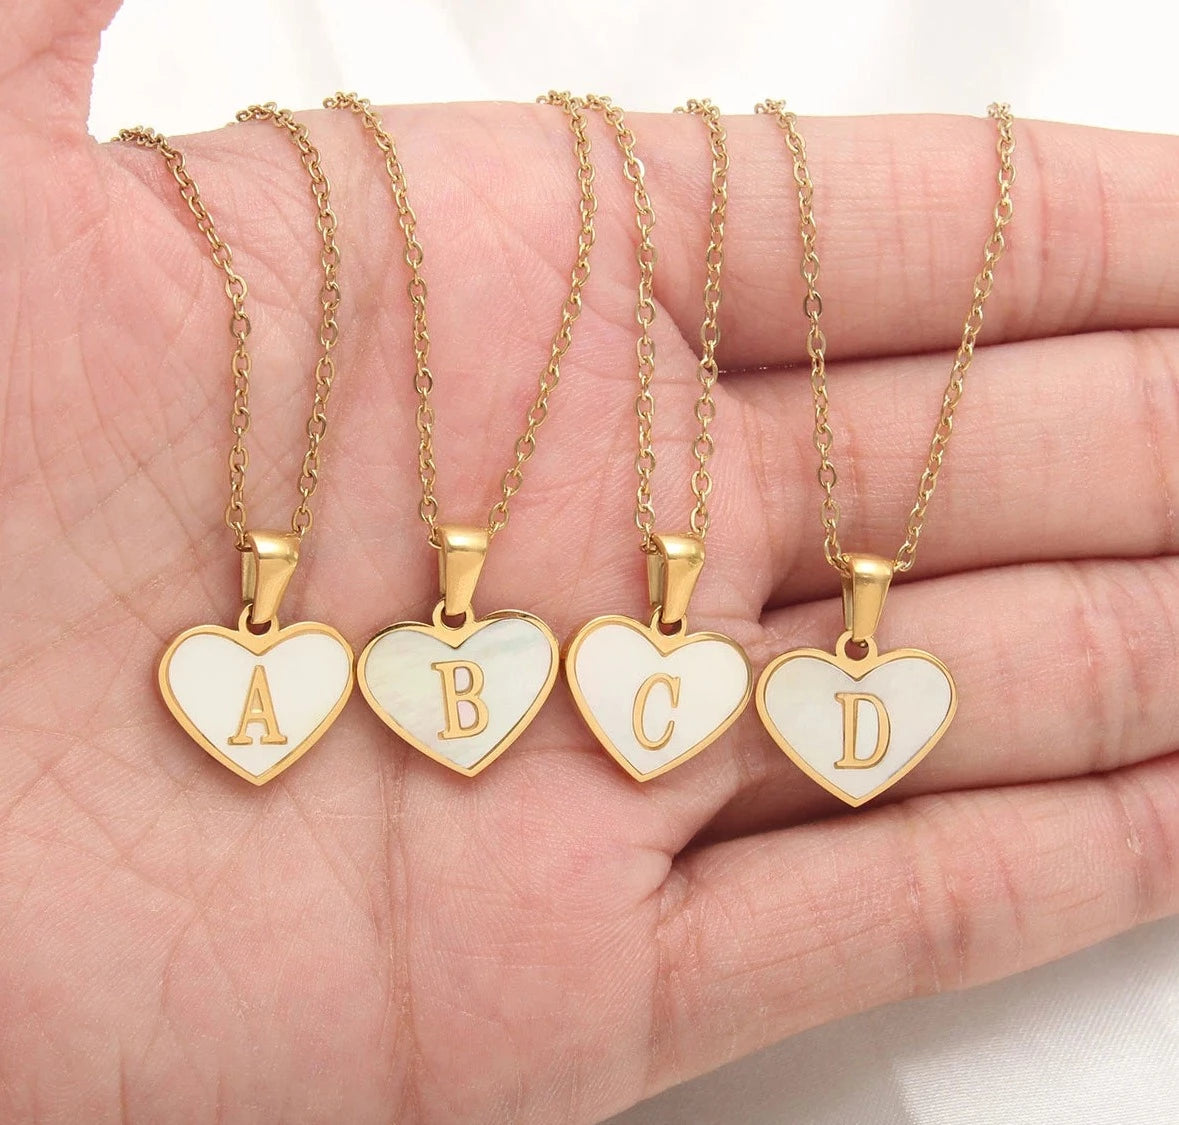 Elegance in Letters: A-Z Initials Alphabet Pendant Necklace Jewelry for Girls, Teens, and Women with Heart,  Anti-Allergic Letter Choker!